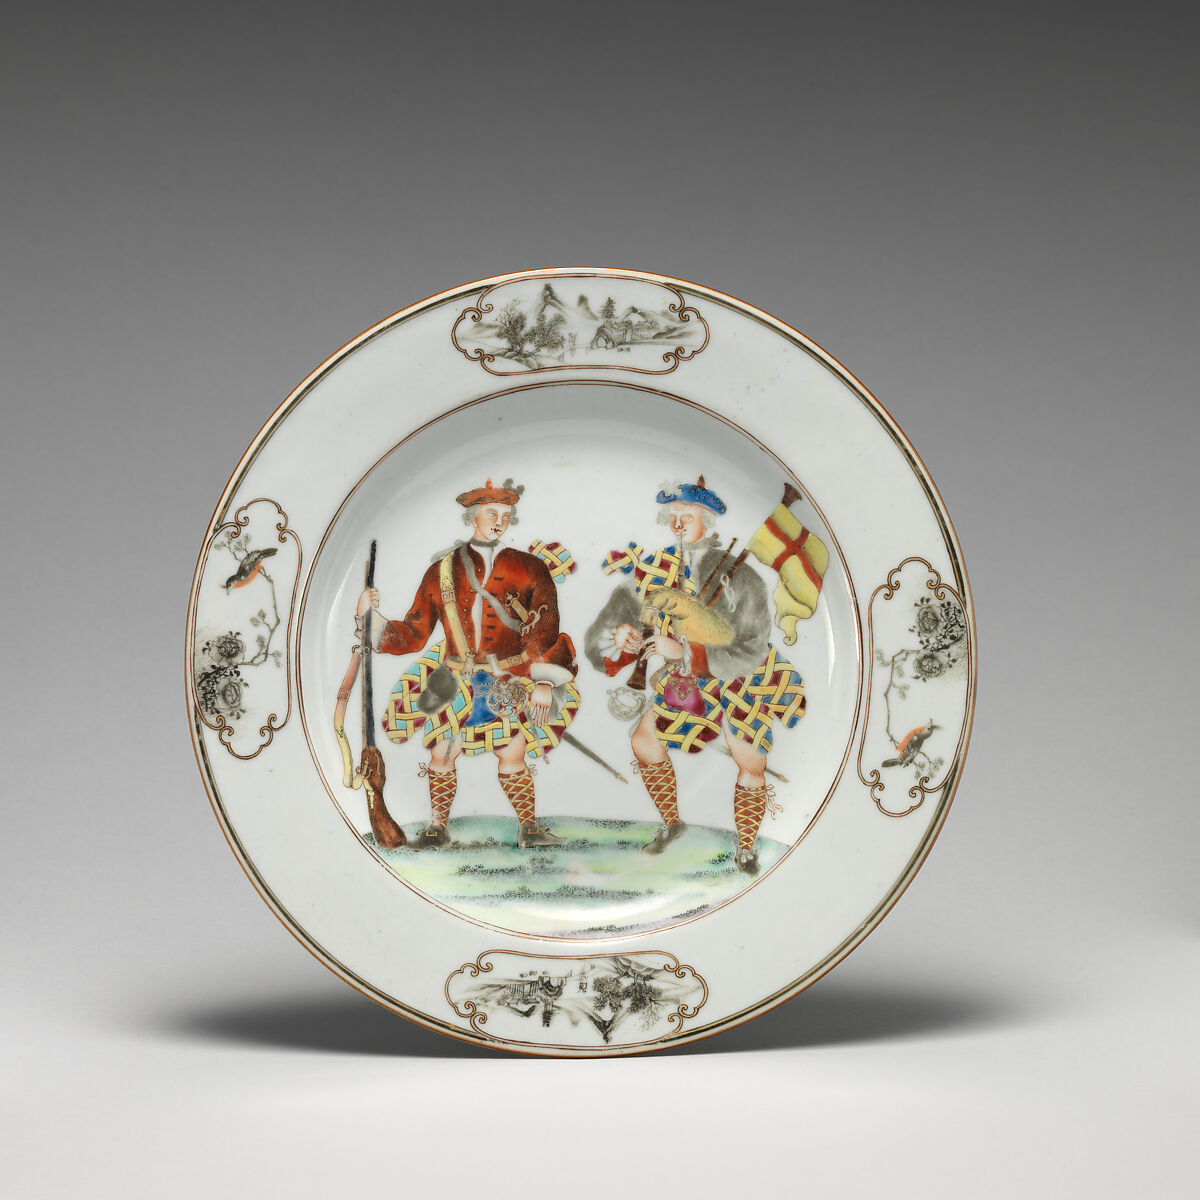 Plate (one of a pair), Hard-paste porcelain, Chinese, for British or Scottish market 